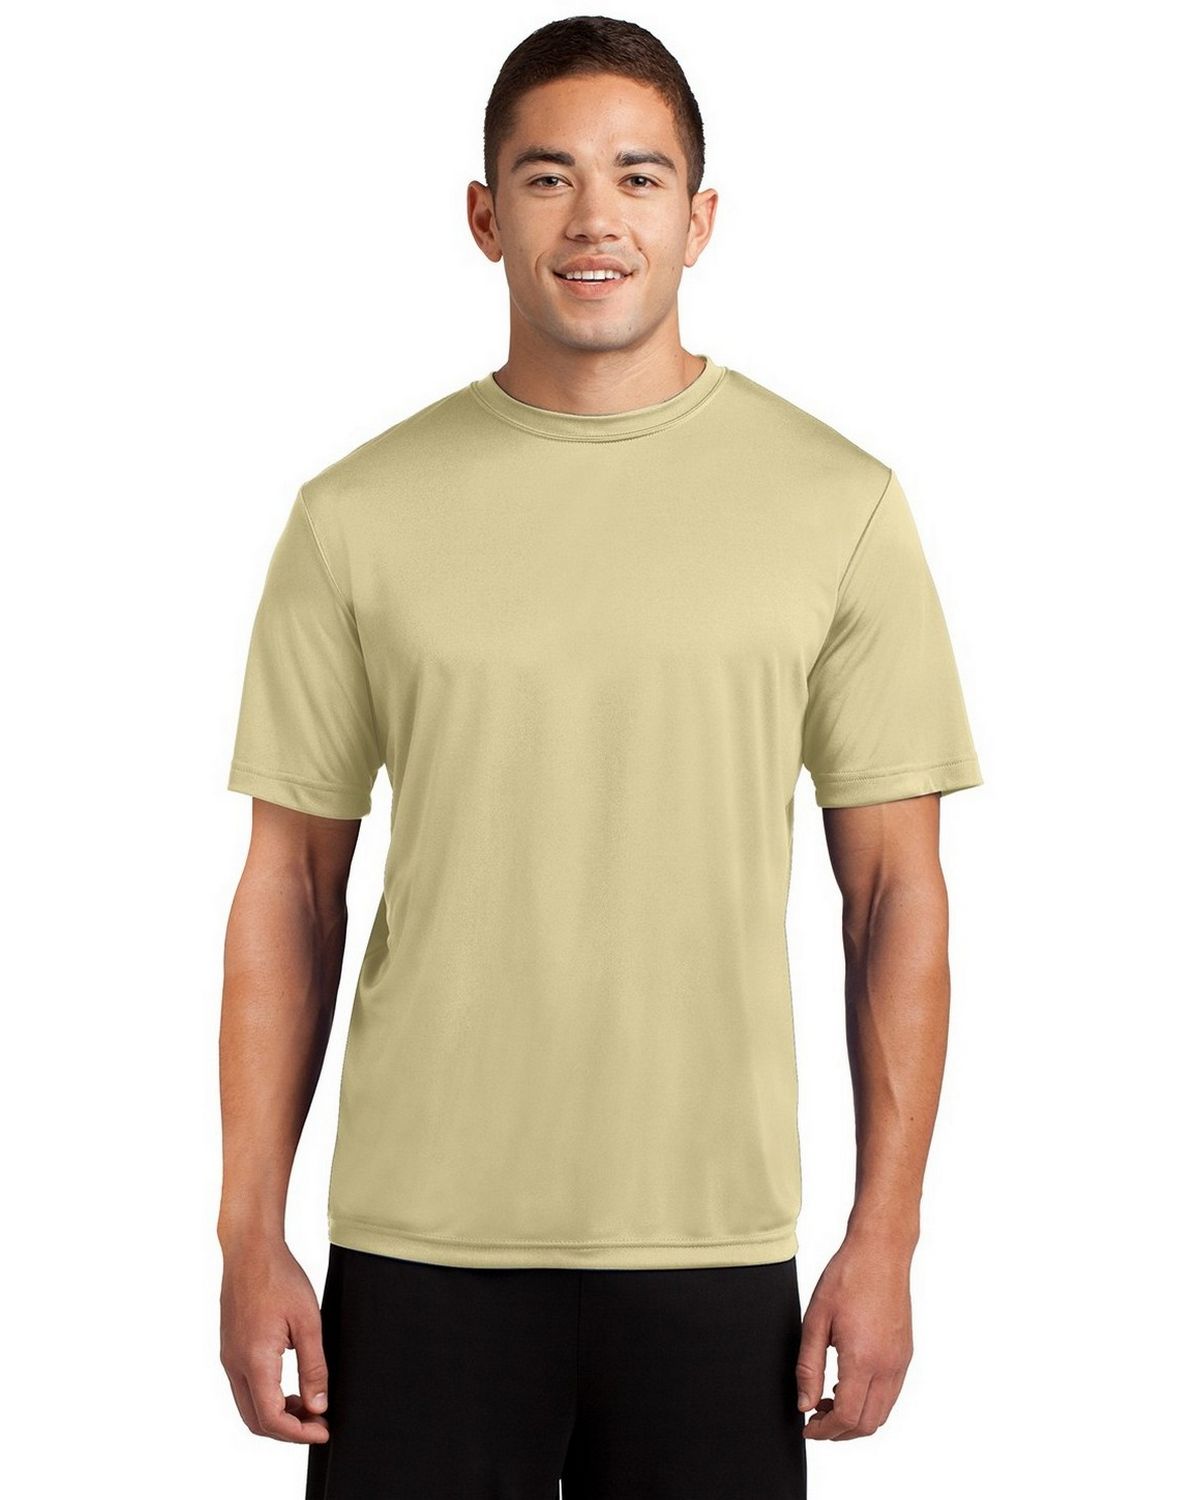 Sport-Tek ST350 Competitor Tee by Port Authority - ApparelnBags.com